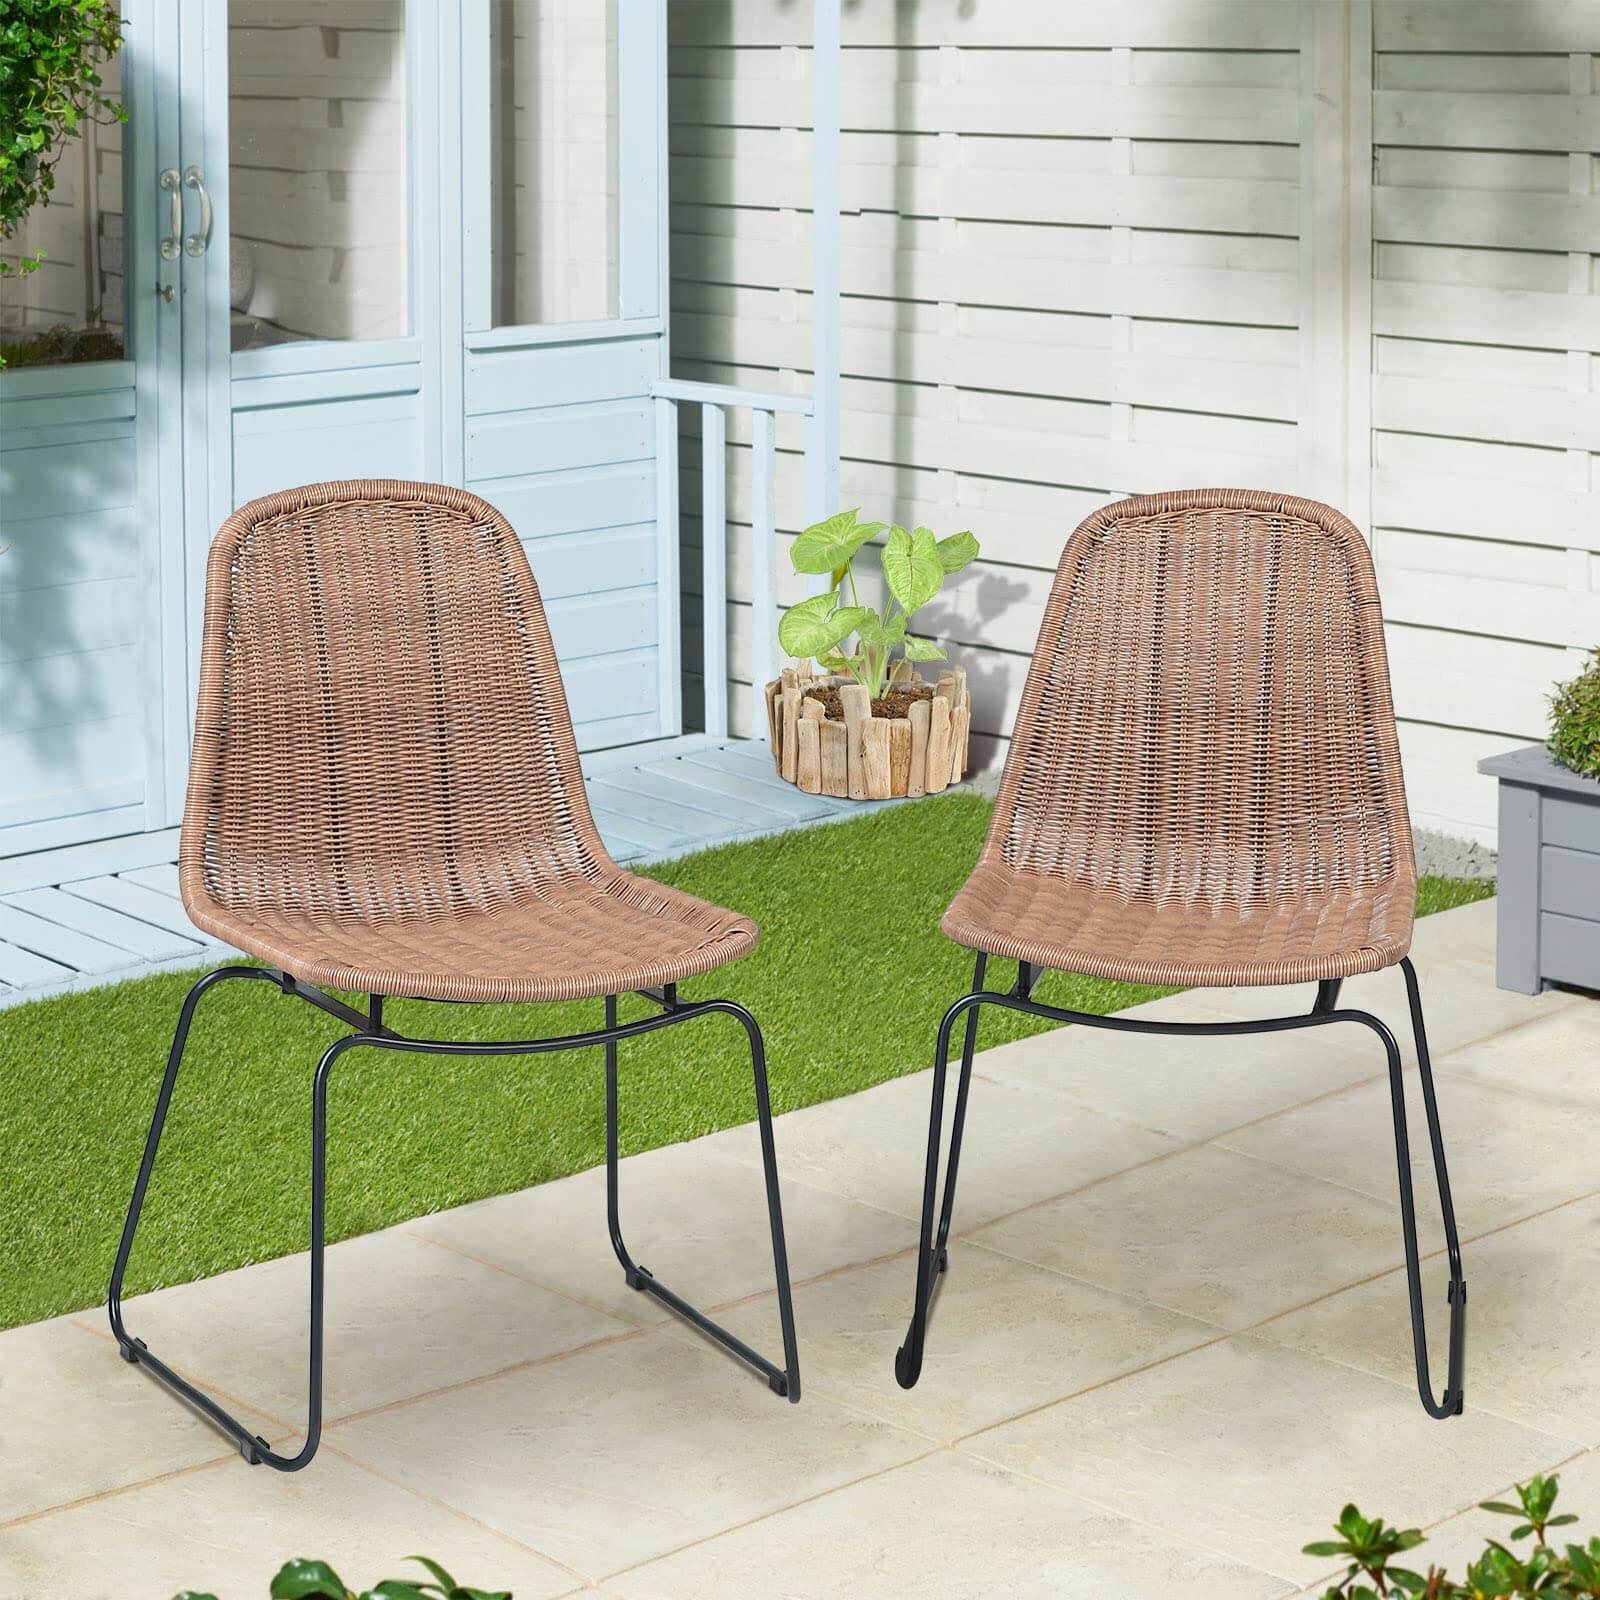 Outdoor Wicker Chairs Set of 2, Patio Dining Rattan Armless Chairs with Curved Back 